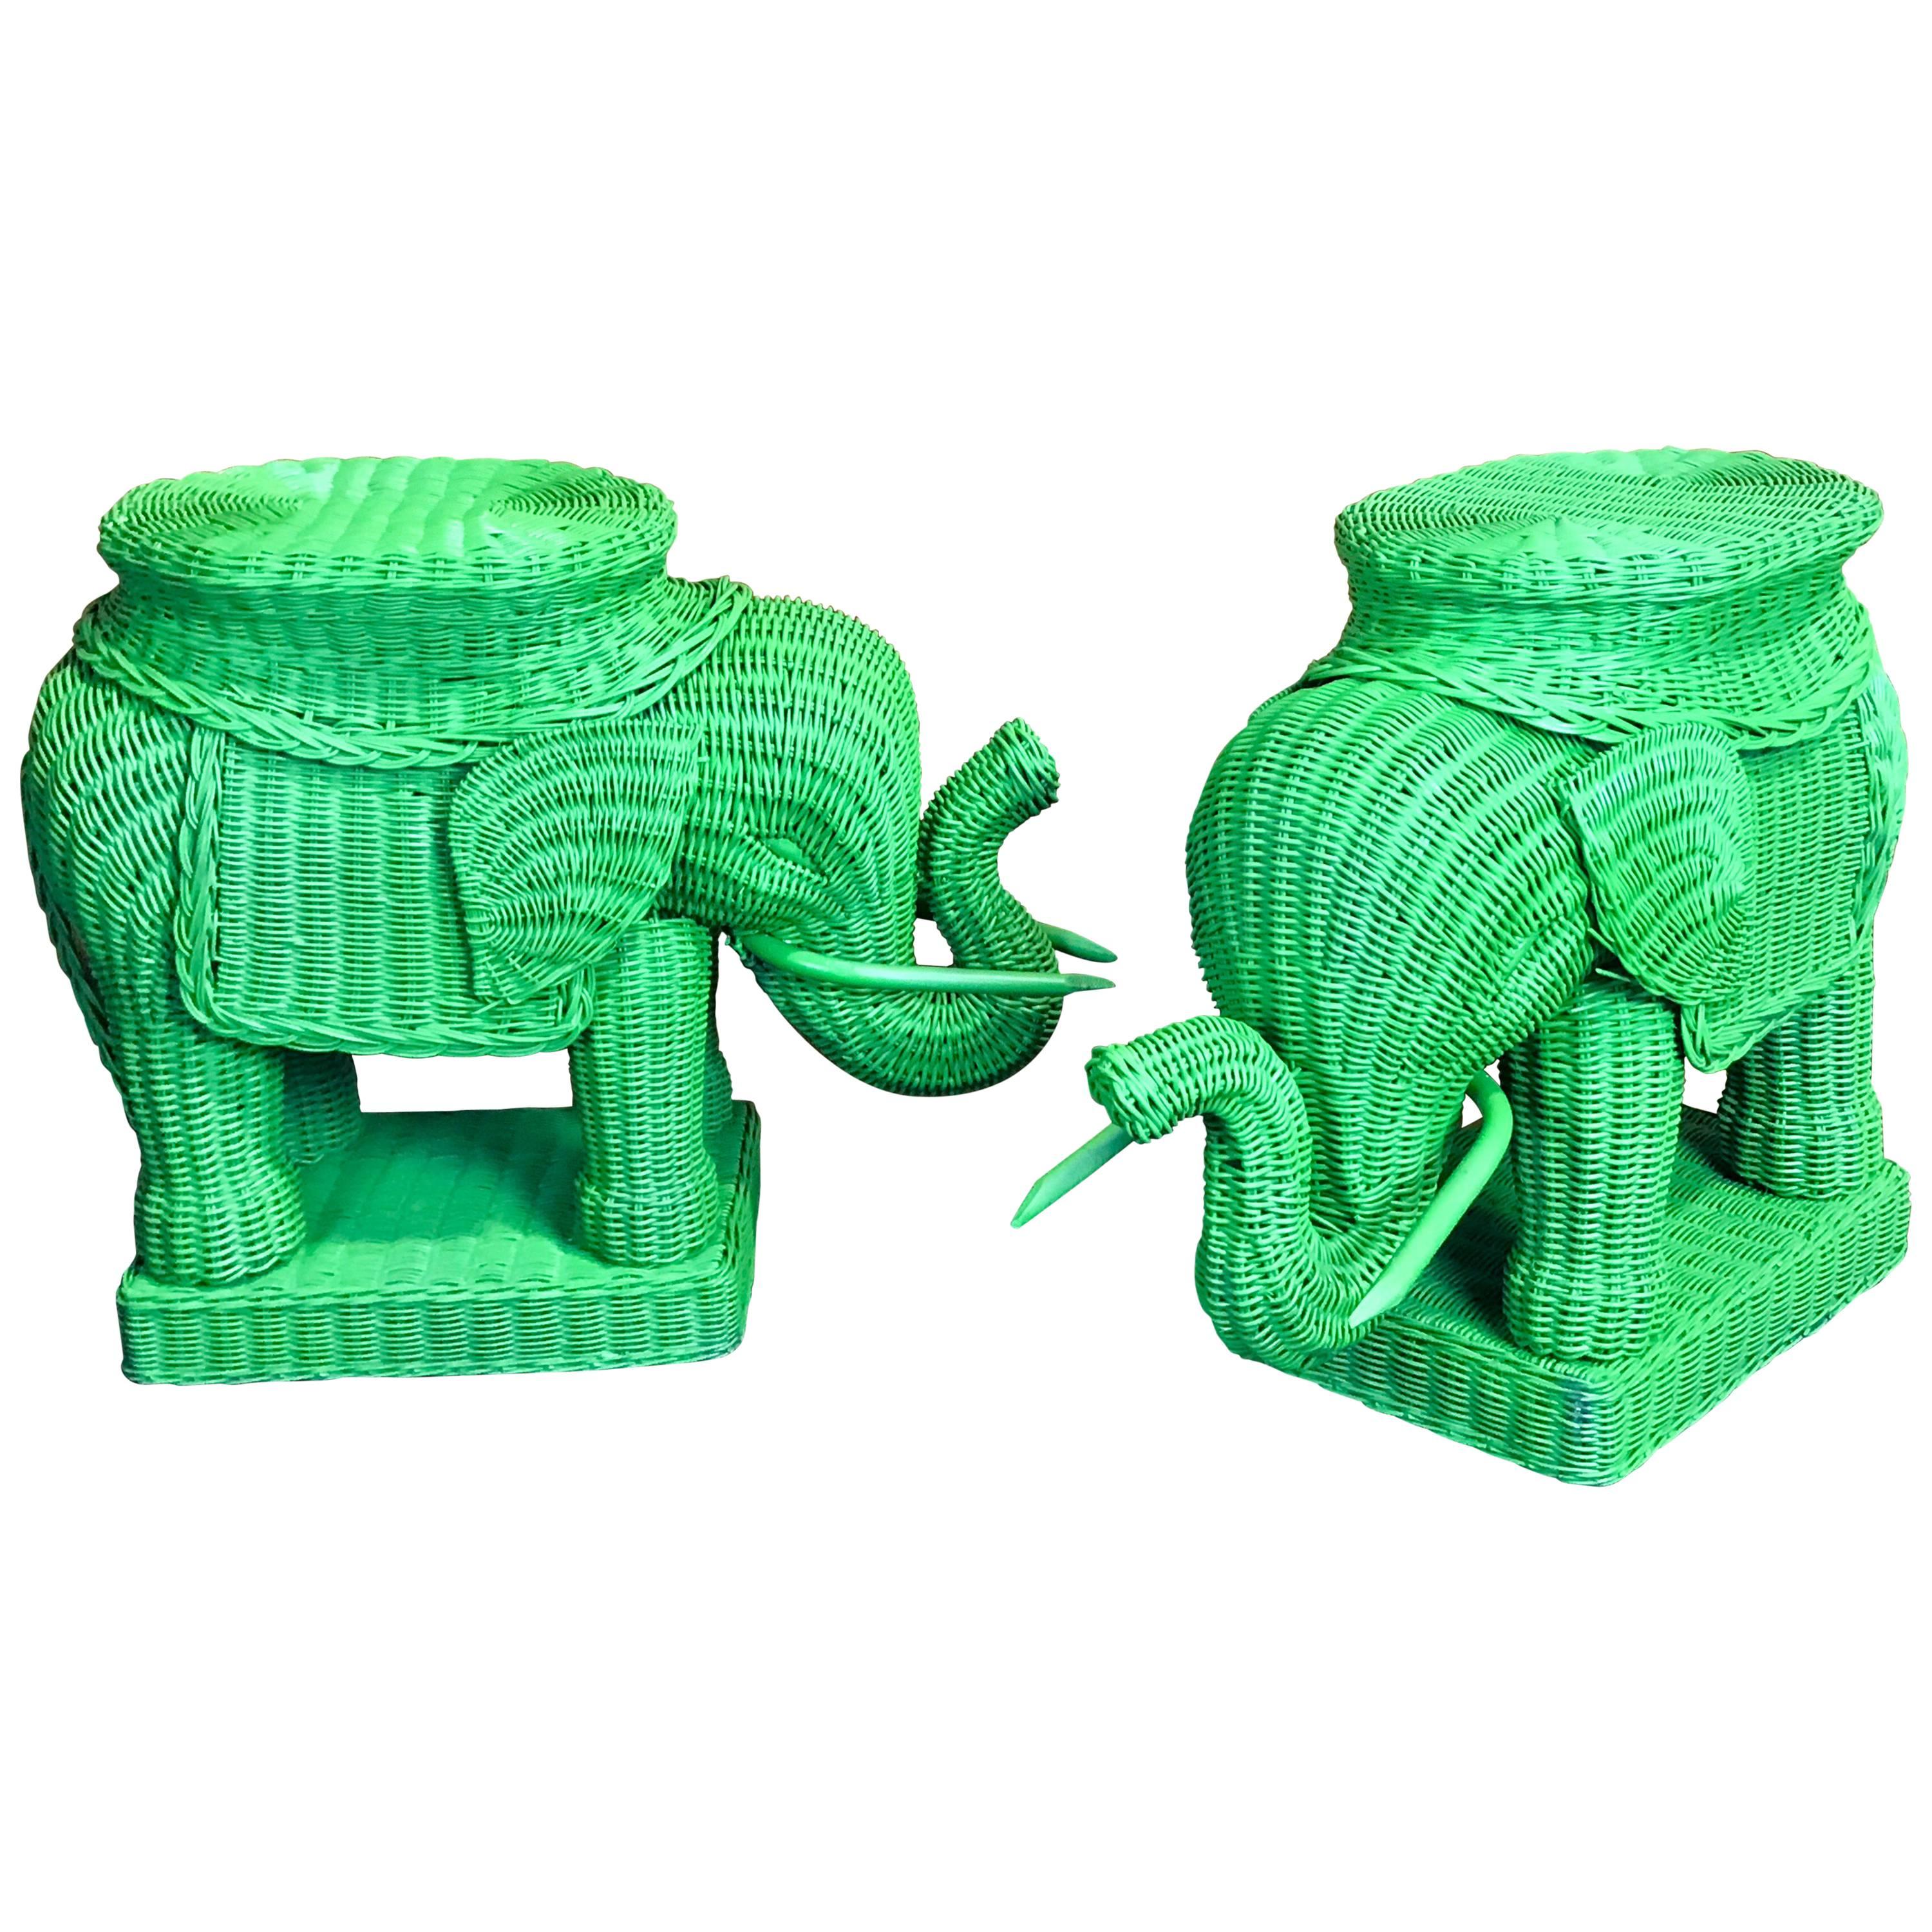 Pair of Chinese Export Polychromed Wicker Elephant Garden Seats